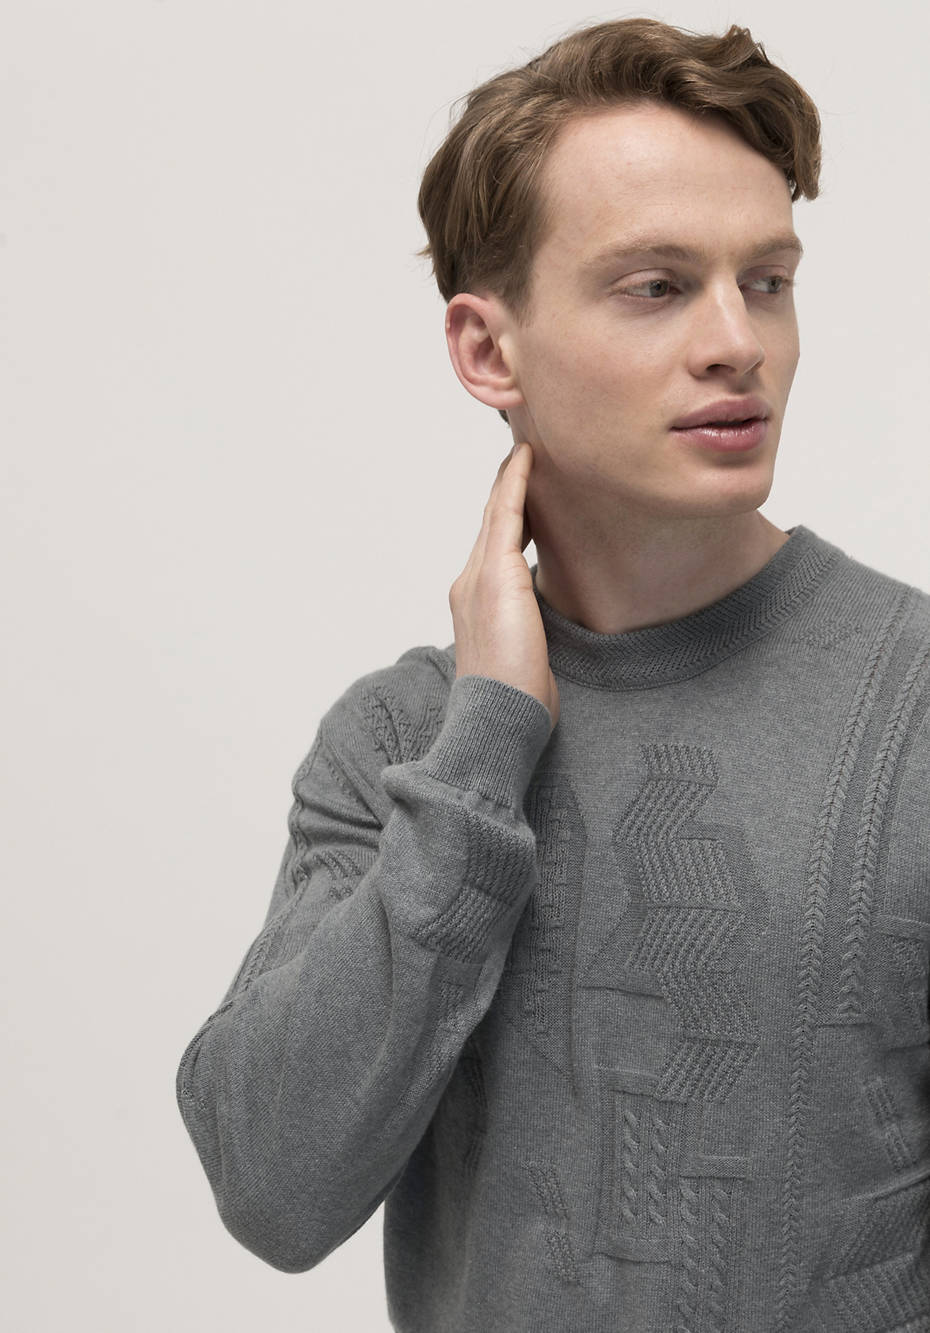 Textured sweater made of mineral-dyed organic cotton with cashmere